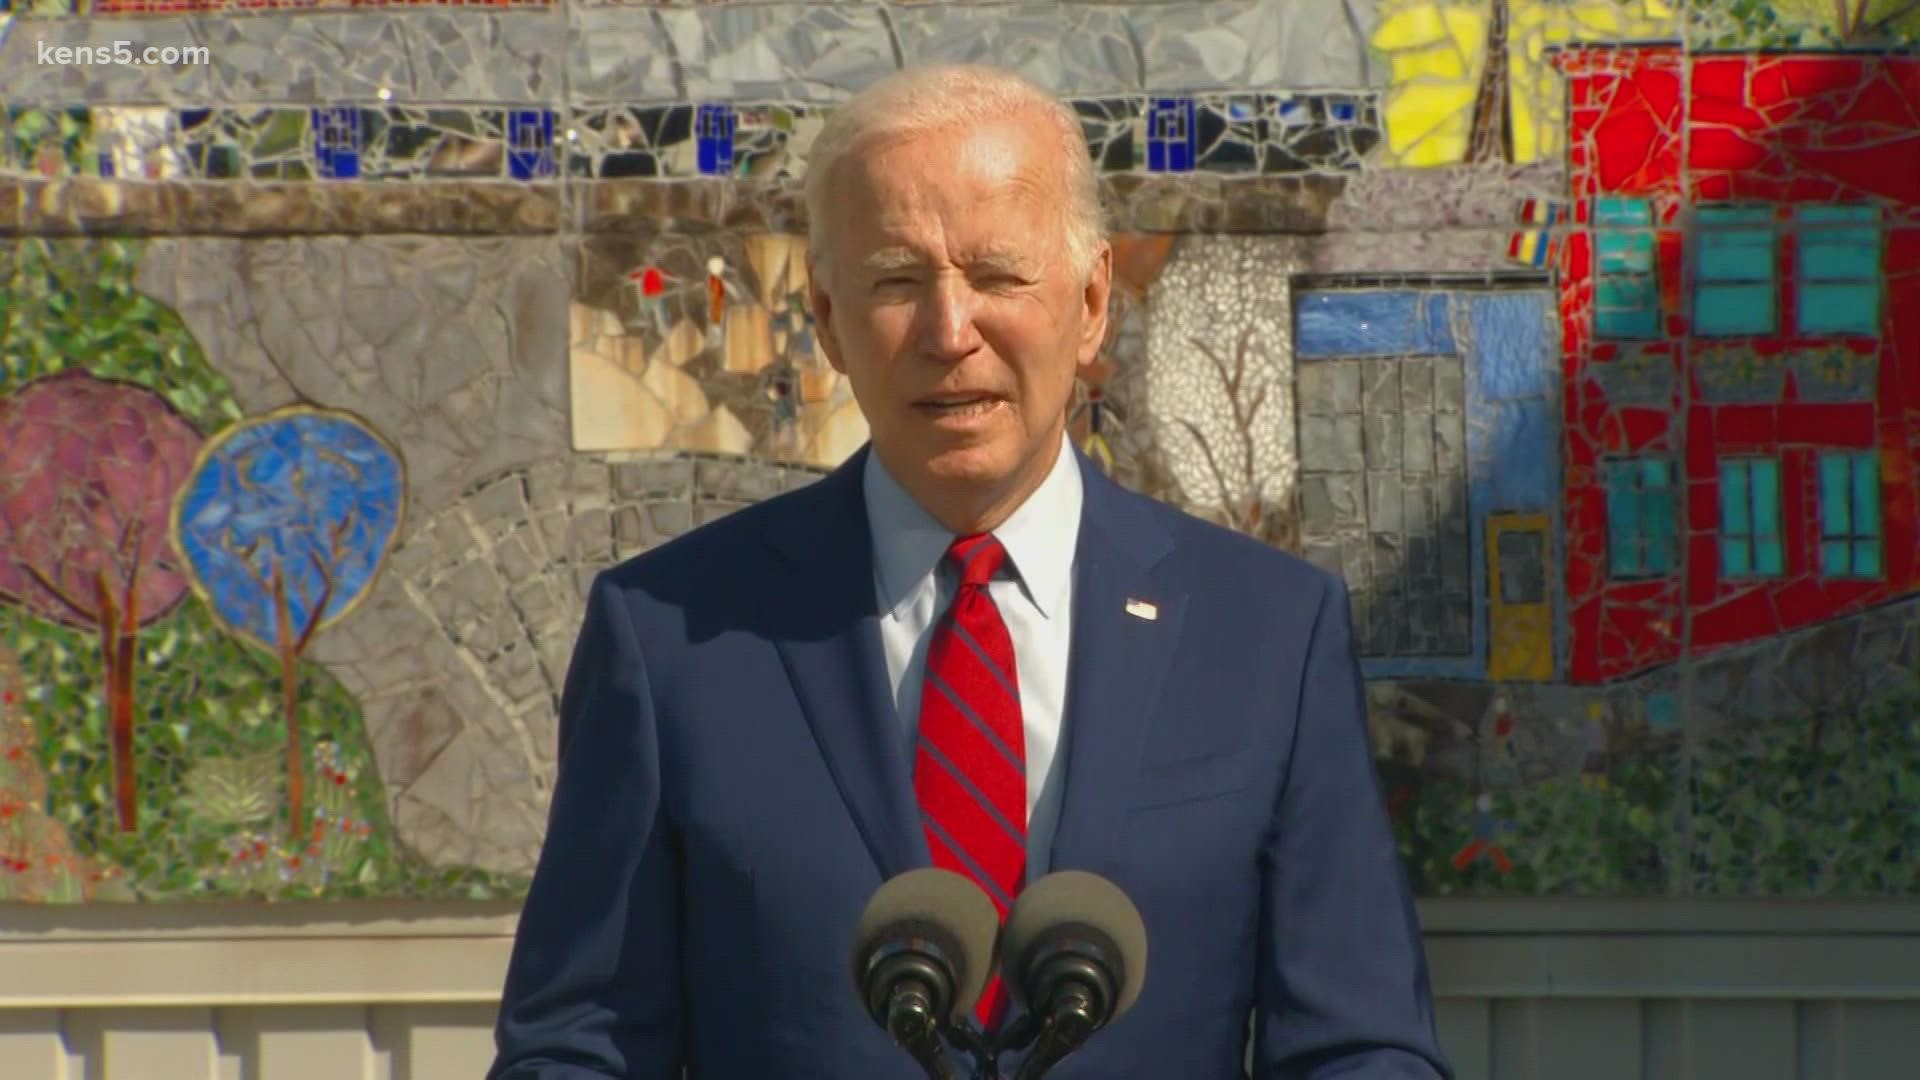 Republican leaders said Biden was going too far in trying to muscle private companies and workers, a certain sign of legal challenges to come.